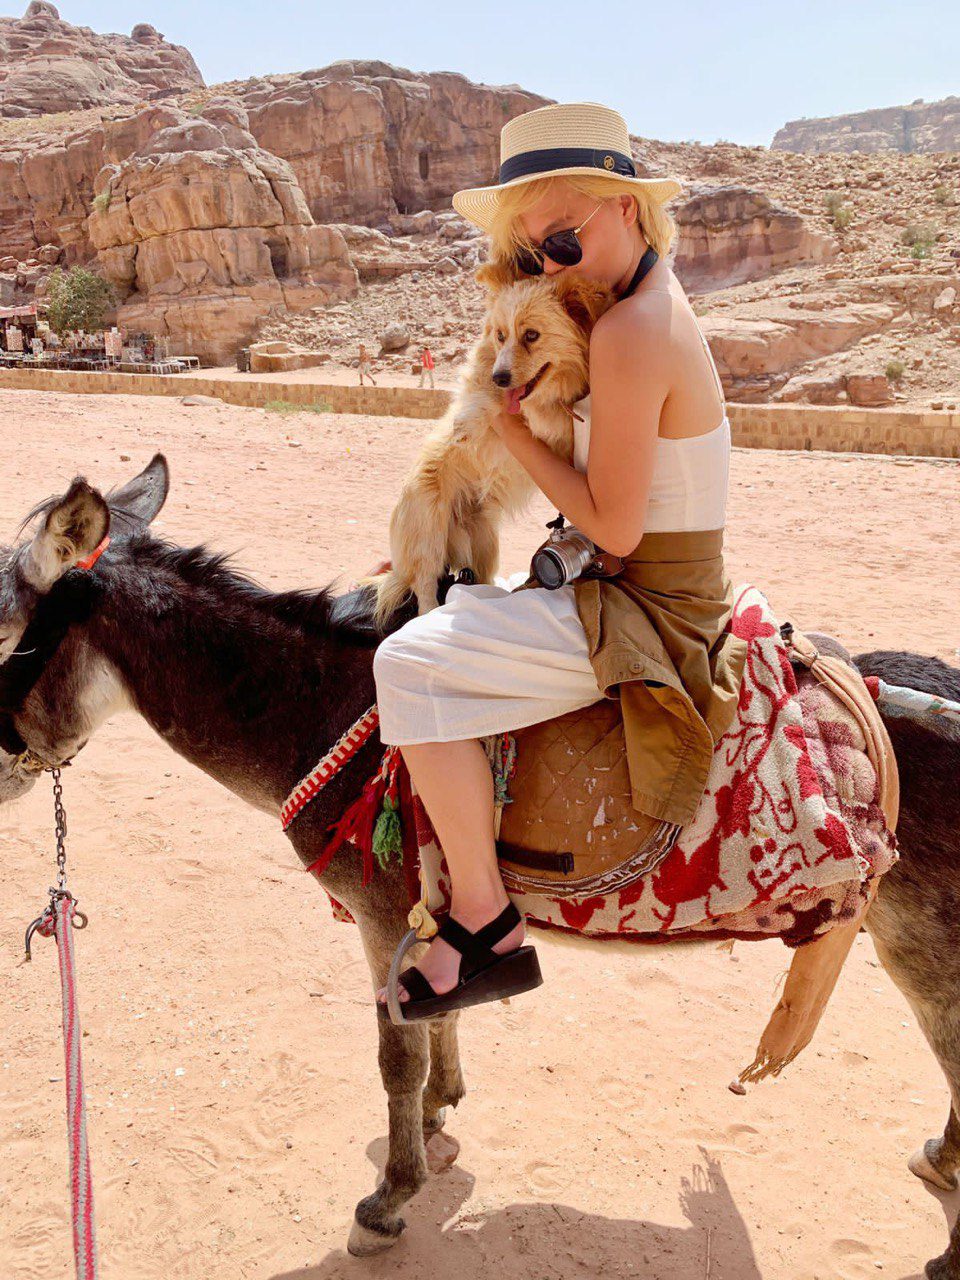 A donkey in Petra